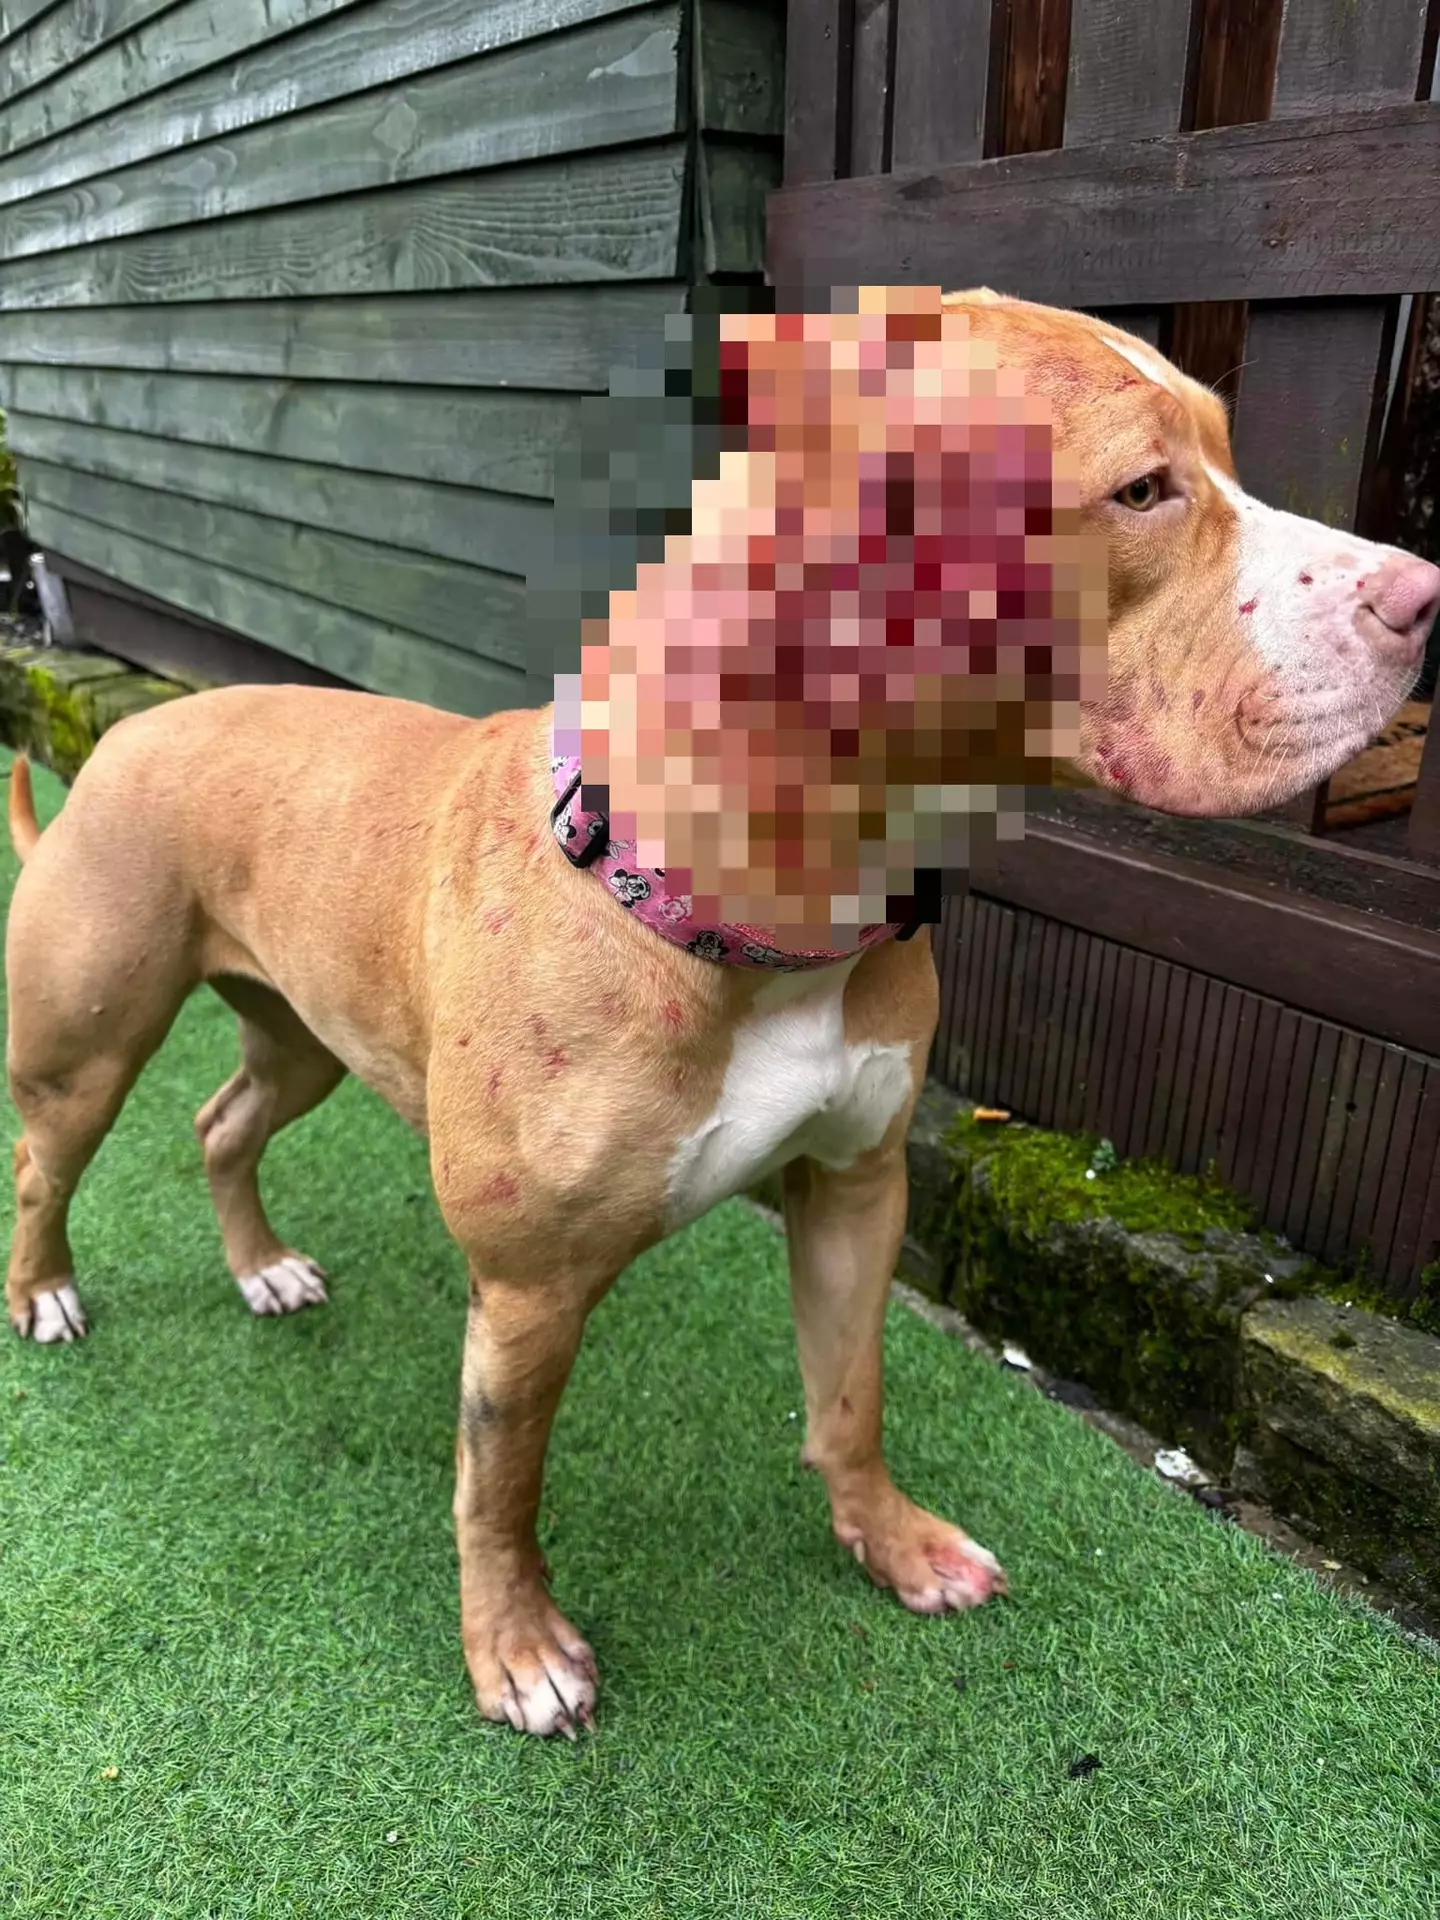 The owner shared pictures of her dog's injuries online.